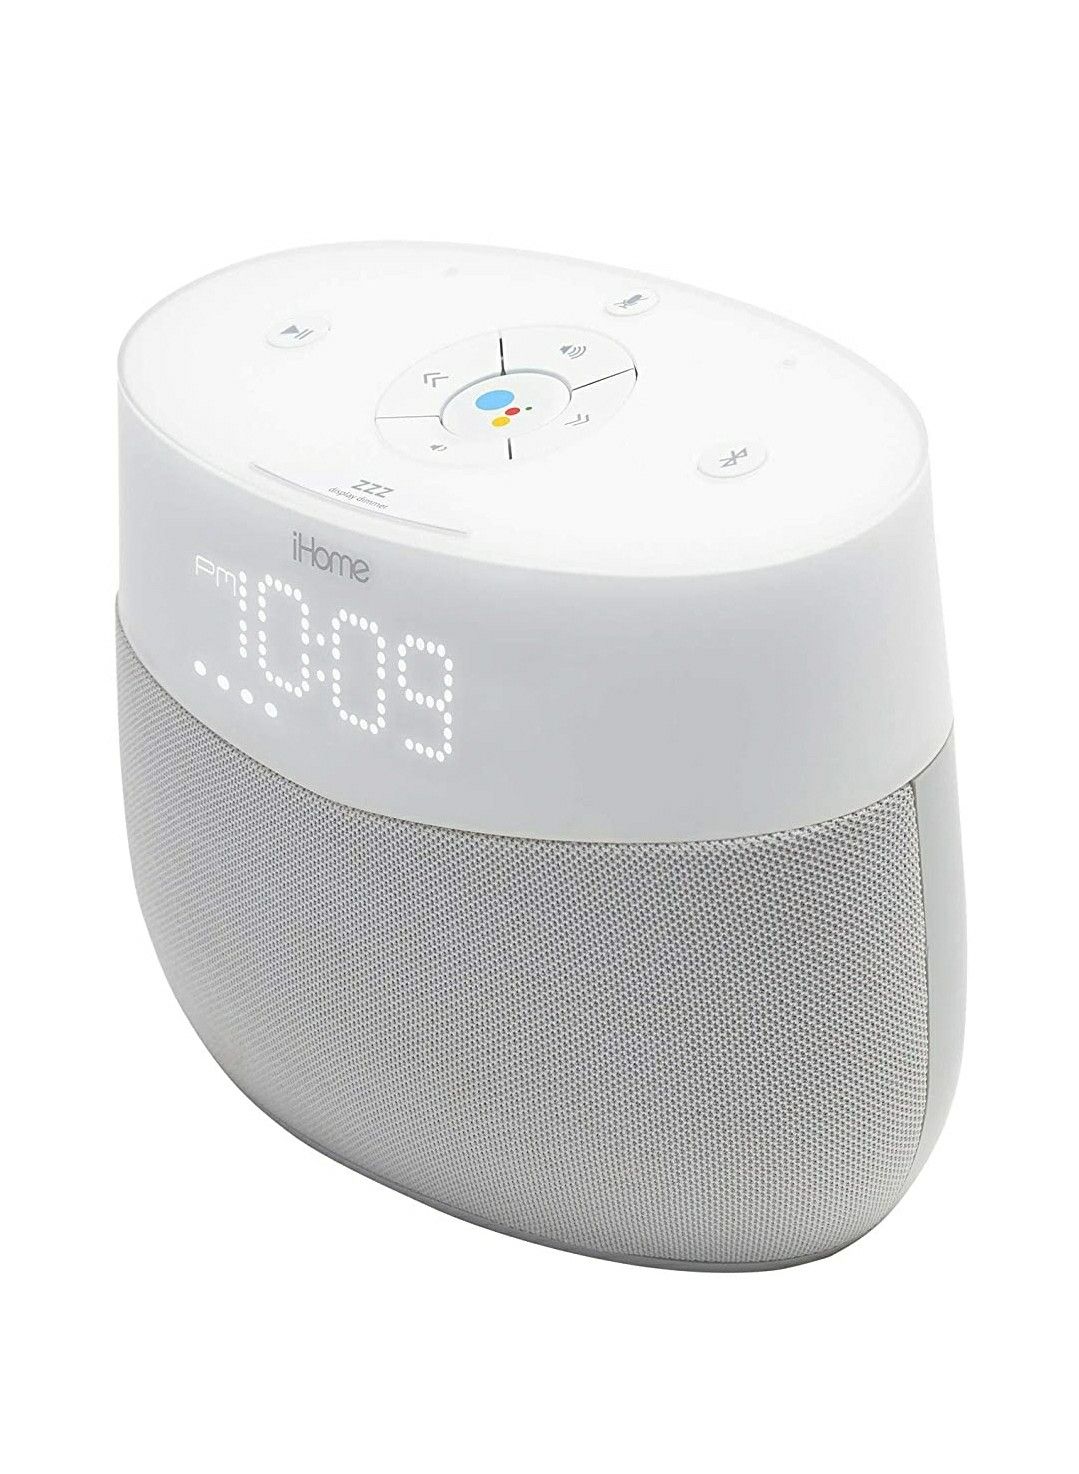 iHome Google Assistant Built-in Chromecast Smart Home Alarm Clock with Wi-Fi Multiroom Audio Bluetooth Speaker System for Streaming Music